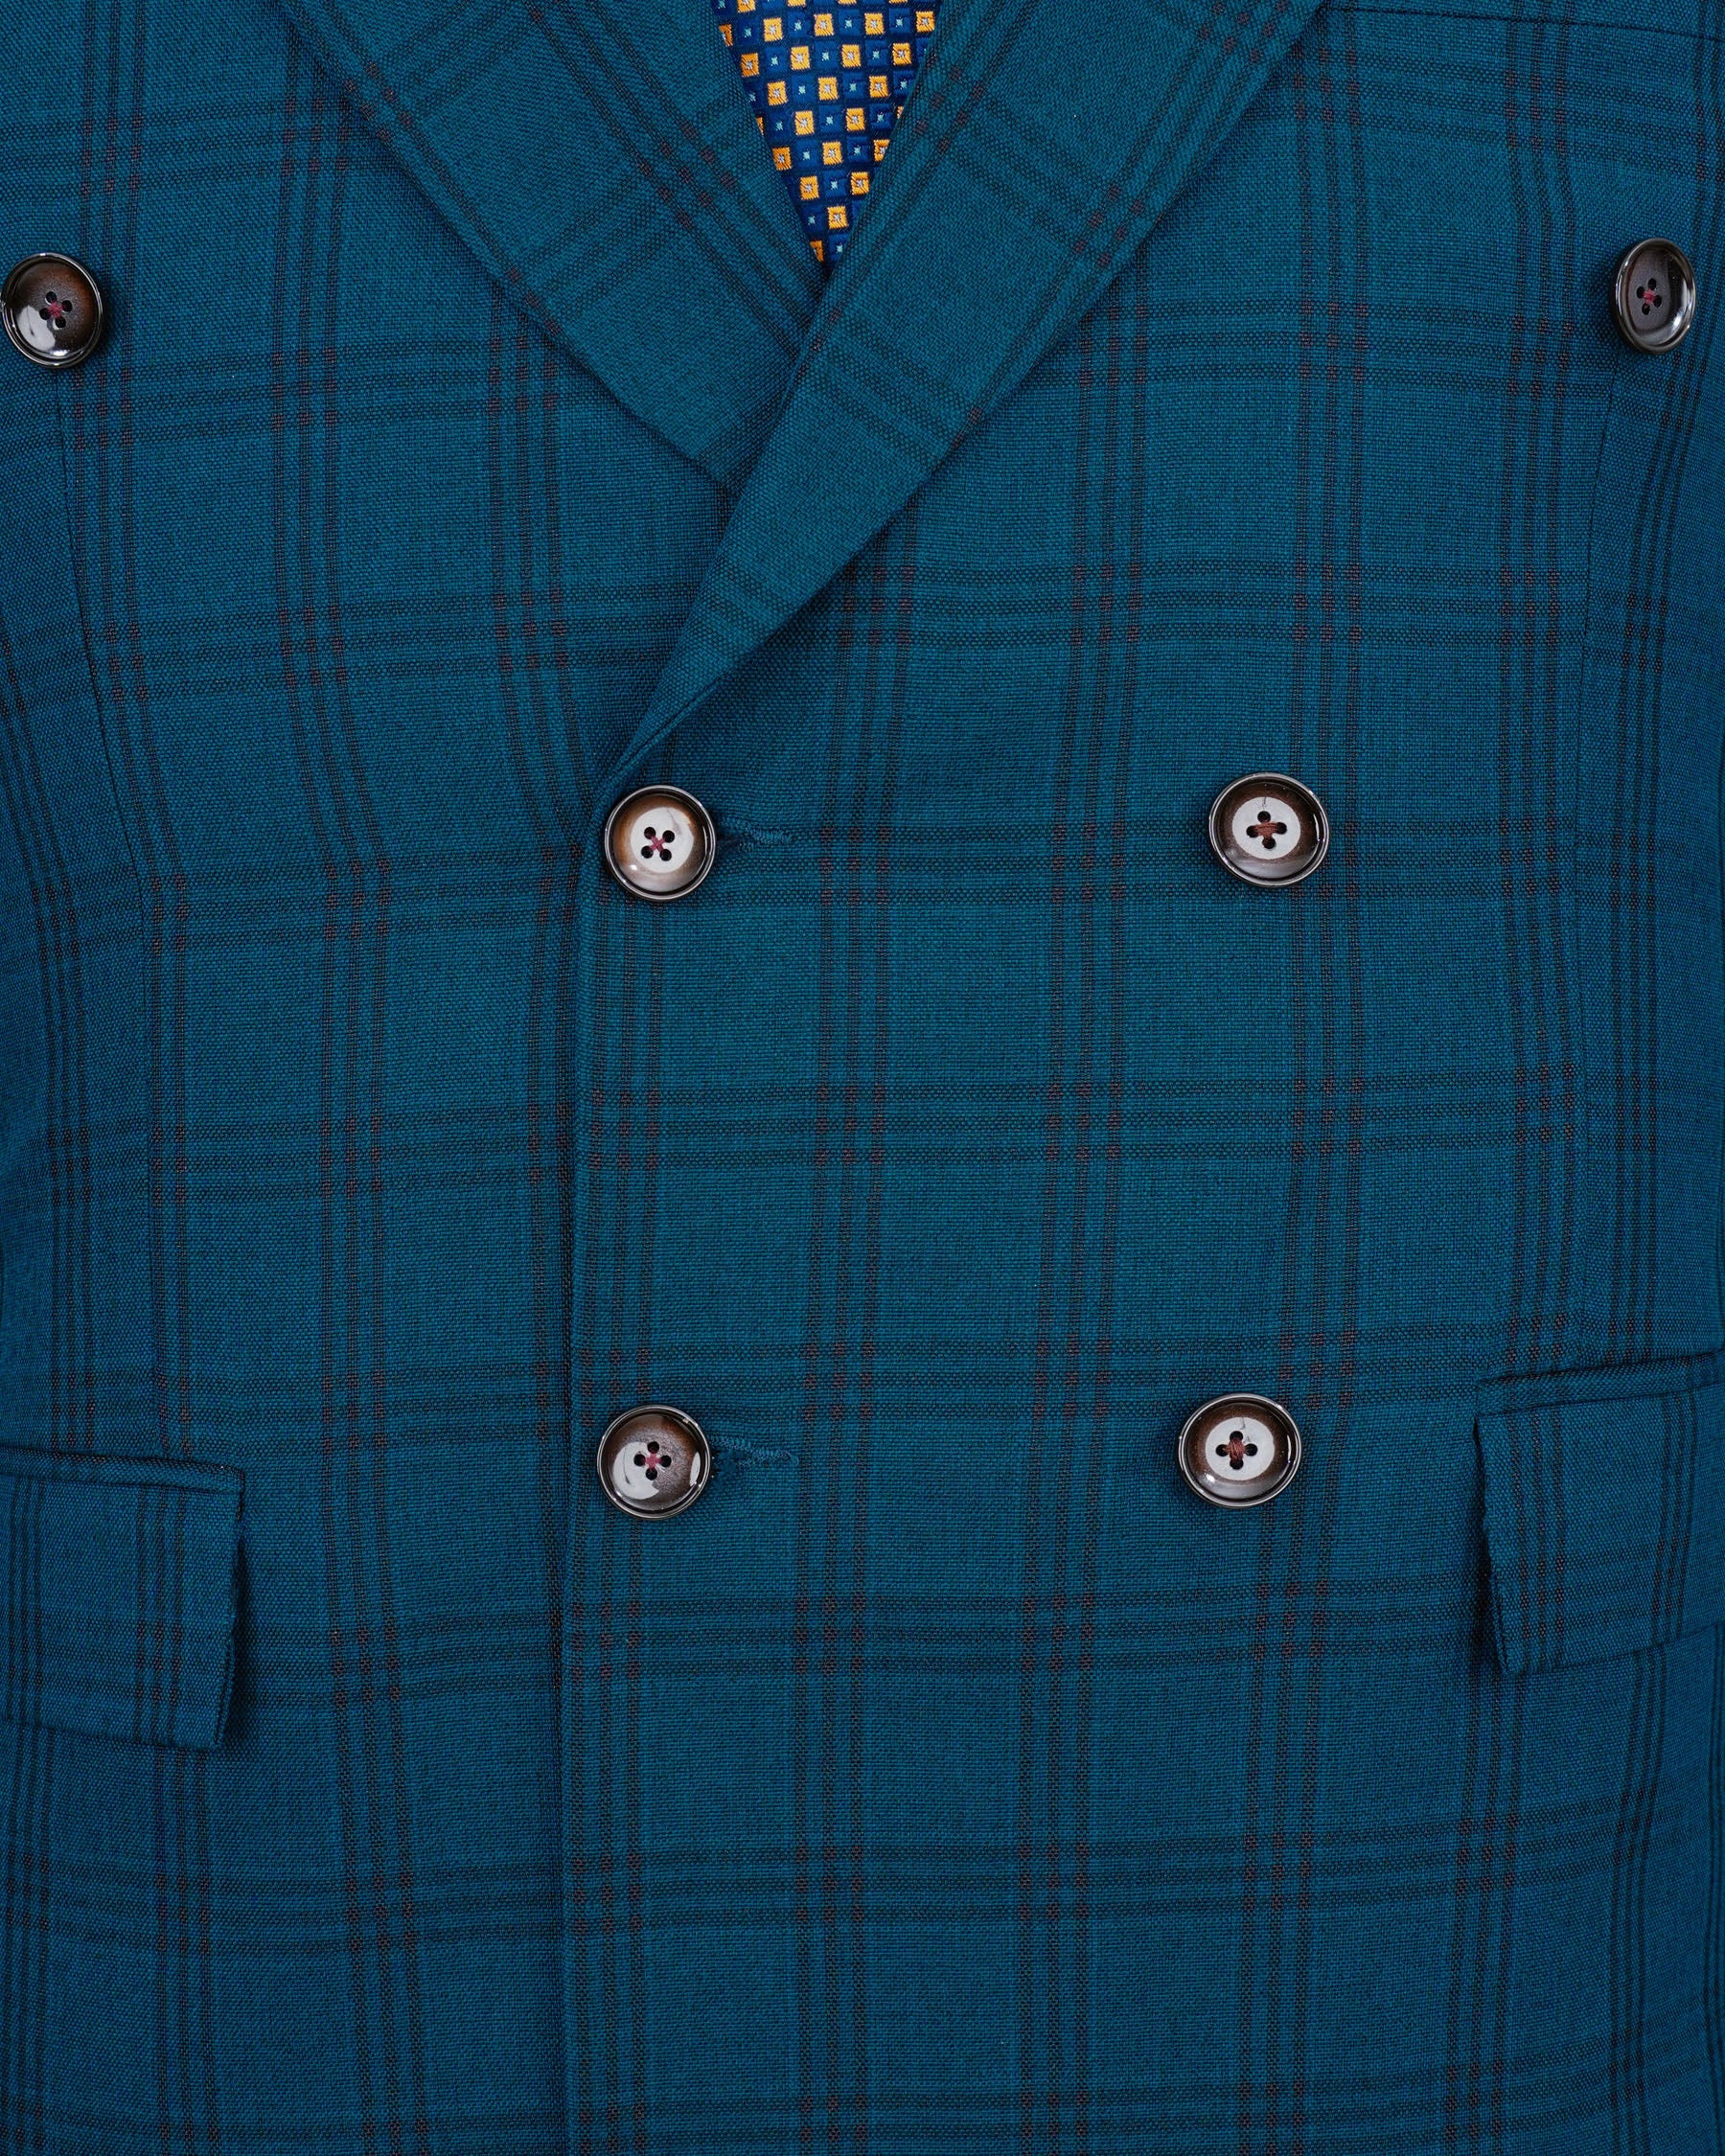 Sapphire Blue With Black Plaid Double Breasted Blazer BL1993-DB-36, BL1993-DB-38, BL1993-DB-40, BL1993-DB-42, BL1993-DB-44, BL1993-DB-46, BL1993-DB-48, BL1993-DB-50, BL1993-DB-52, BL1993-DB-54, BL1993-DB-56, BL1993-DB-58, BL1993-DB-60